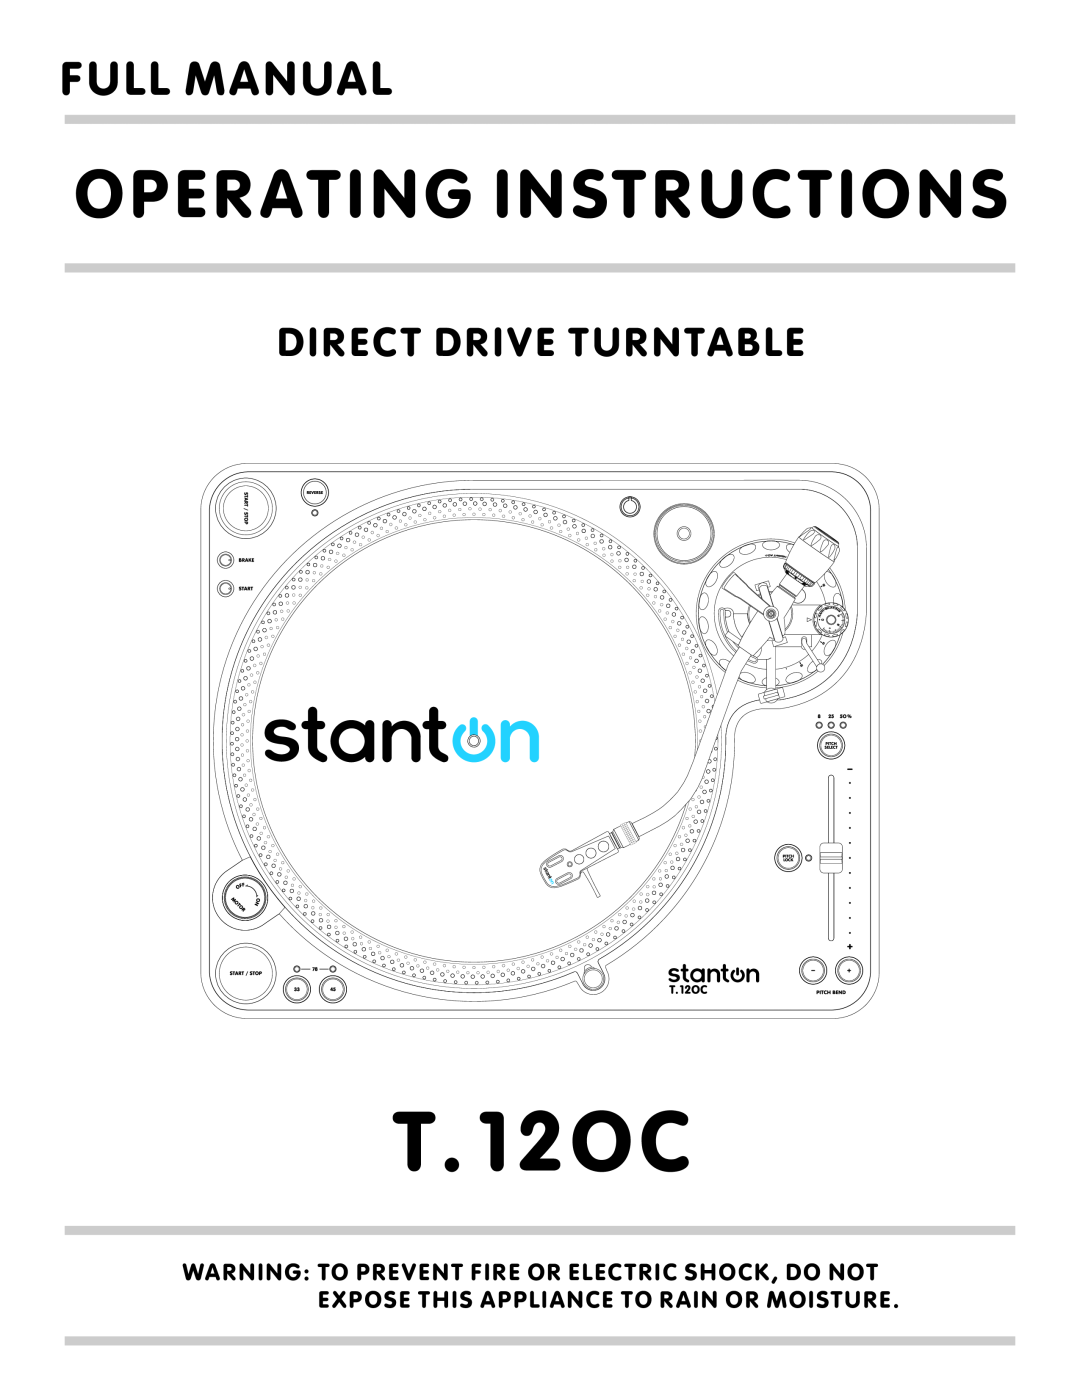 Stanton T.12OC manual Operating Instructions, Full Manual, Direct Drive Turntable 